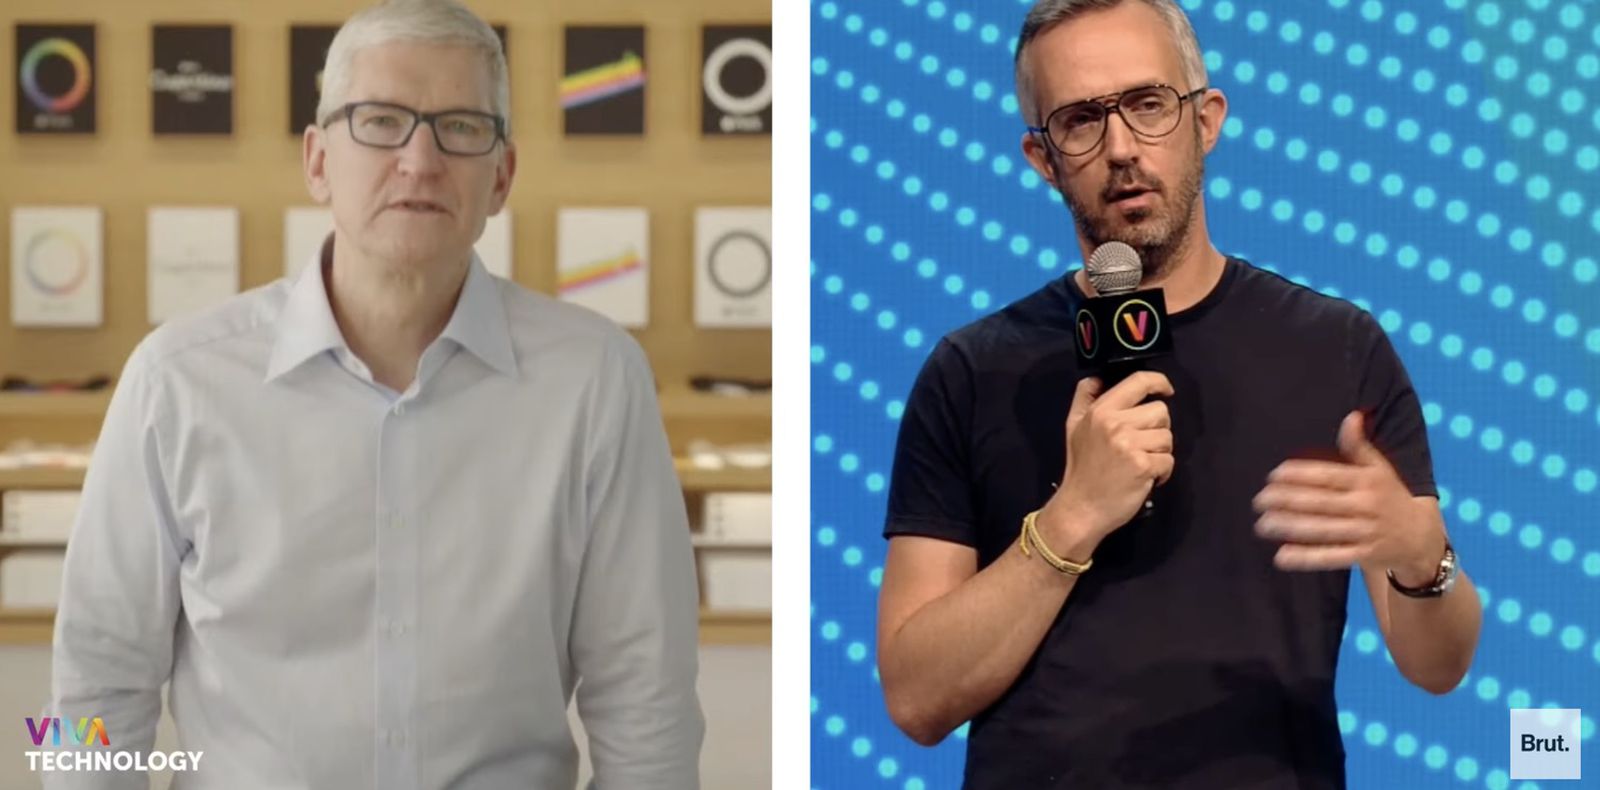 Apple CEO Tim Cook: Sideloading Apps Would ‘Destroy the Security’ of the iPhone